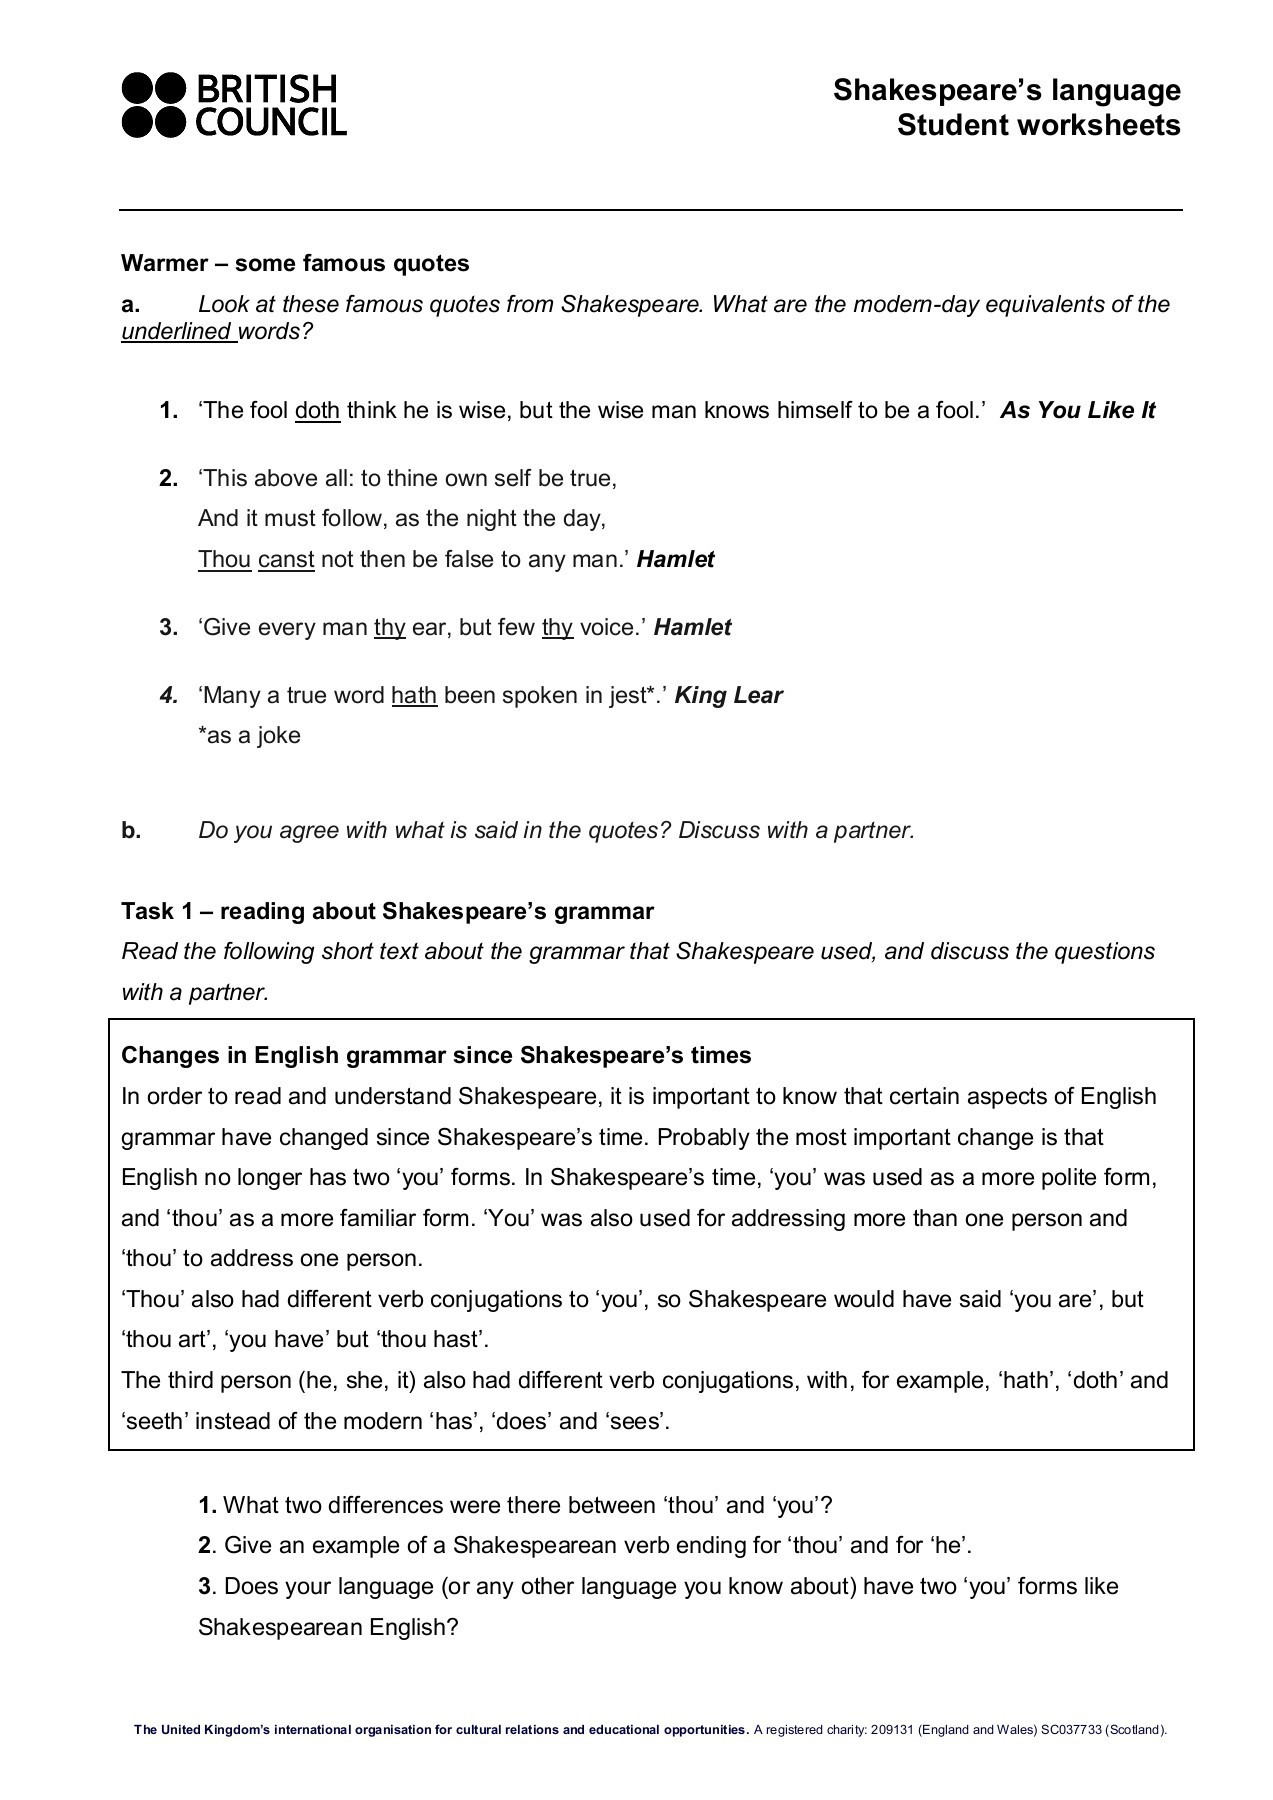 Shakespeare's Language Student Worksheets Pages 1 4 Text — db-excel.com